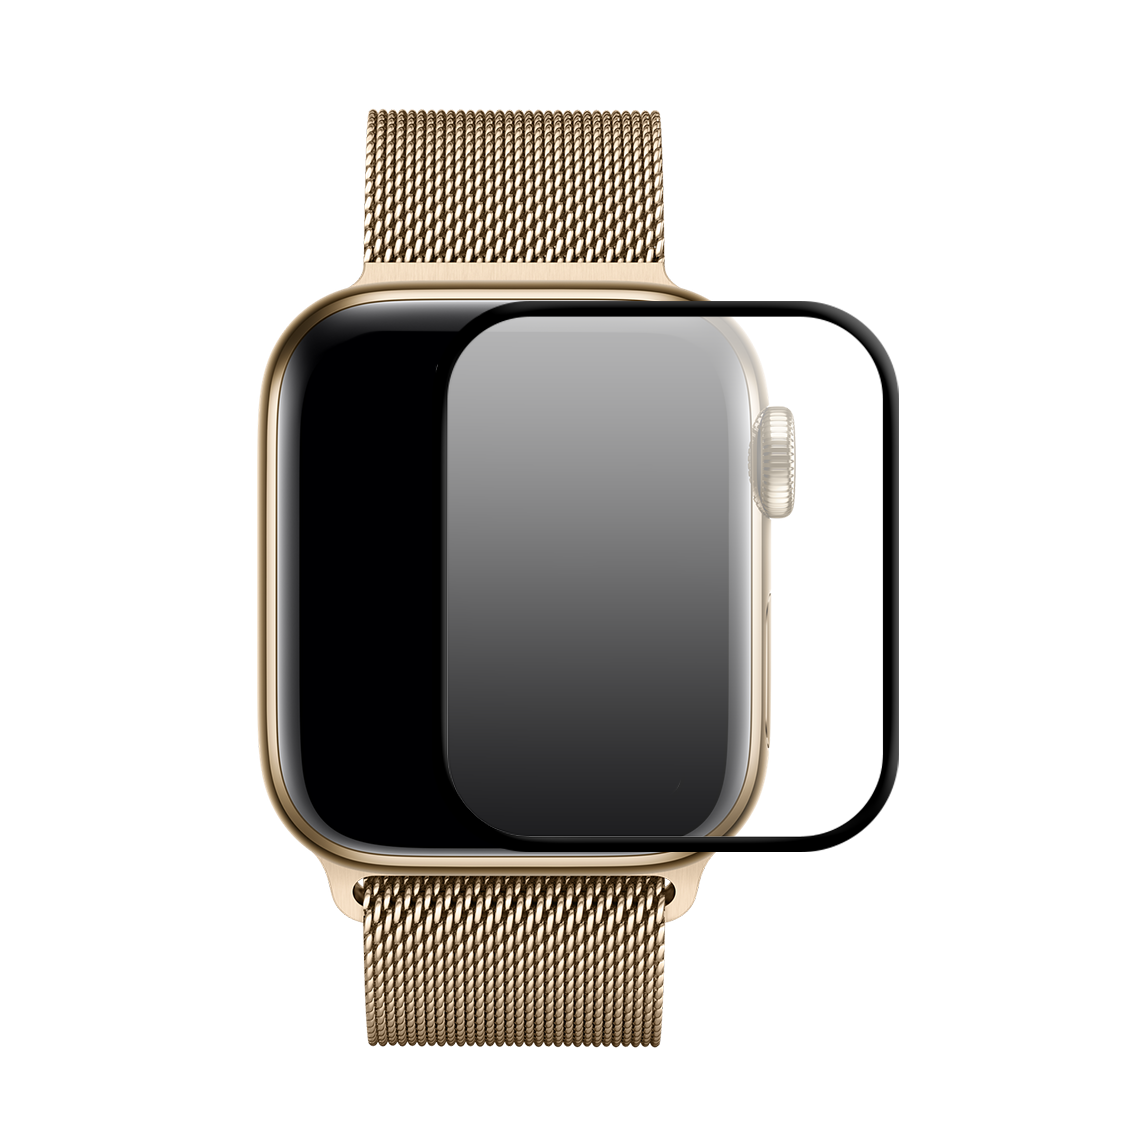 apple-watch-series-7-graphite-stainless-steel-case-with-milanese-loop